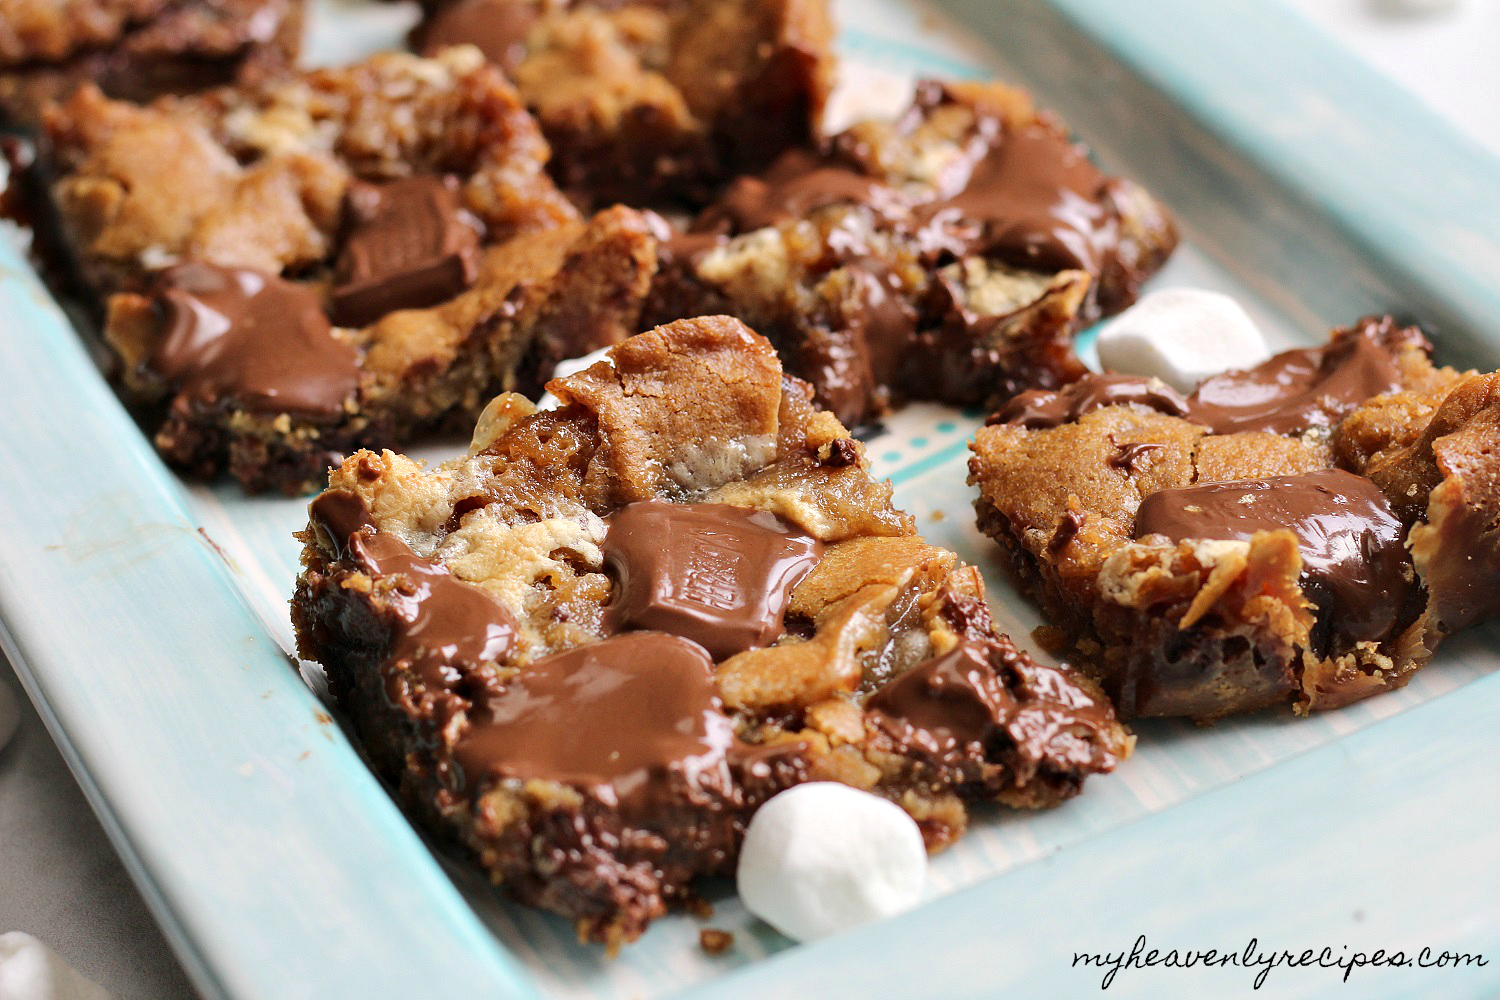 The kids LOVED helping film these Smore Cookie Bars for you!